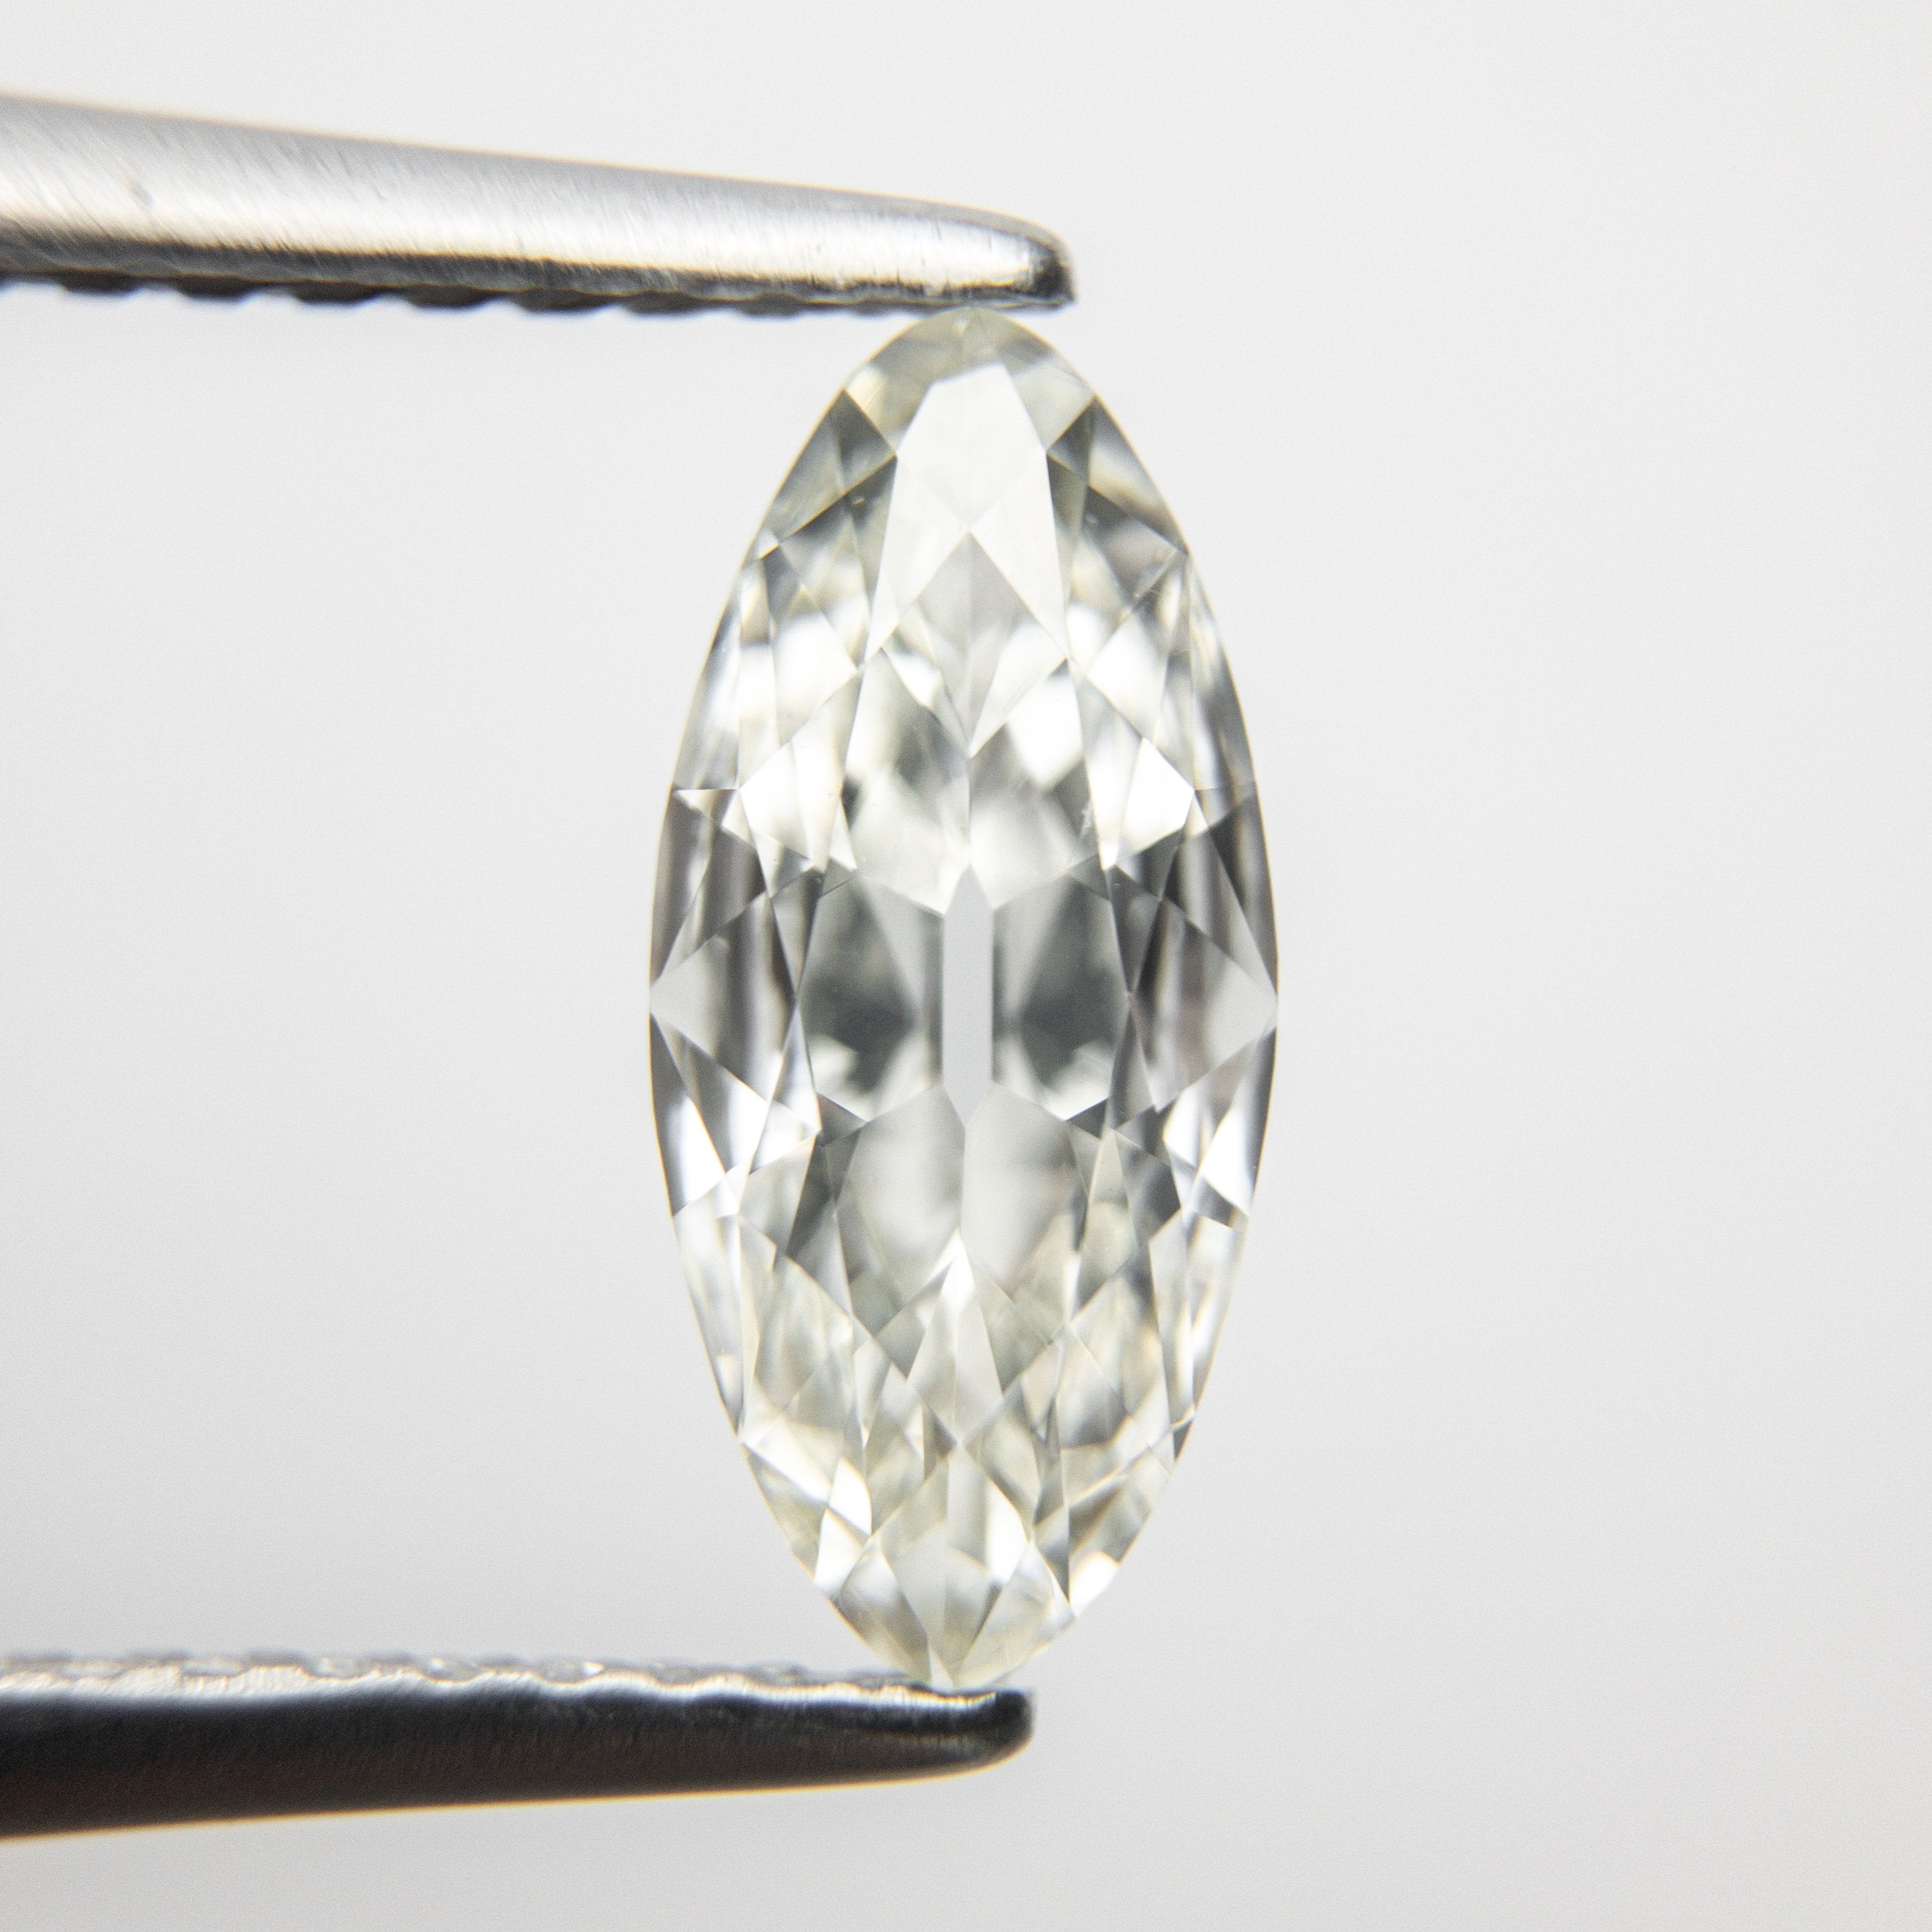 1.00ct 11.13x5.15x2.43mm VS2/SI1 H-I Moval Modern Antique Cut 18349-02 HOLD D1266 10/30/20